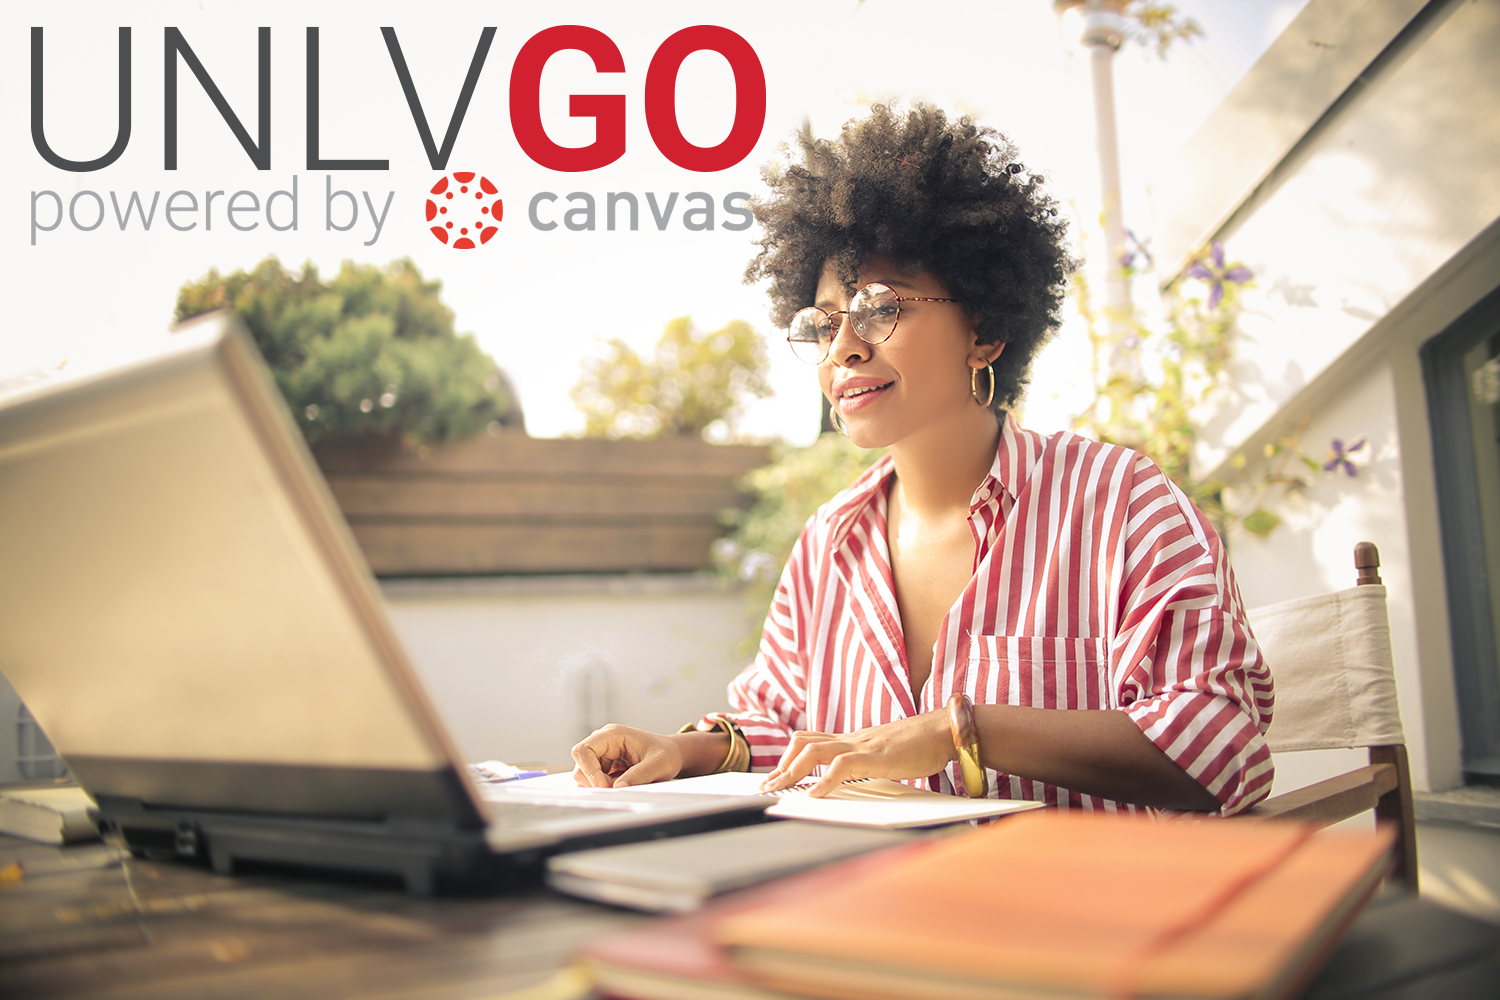 UNLV GO powered by canvas